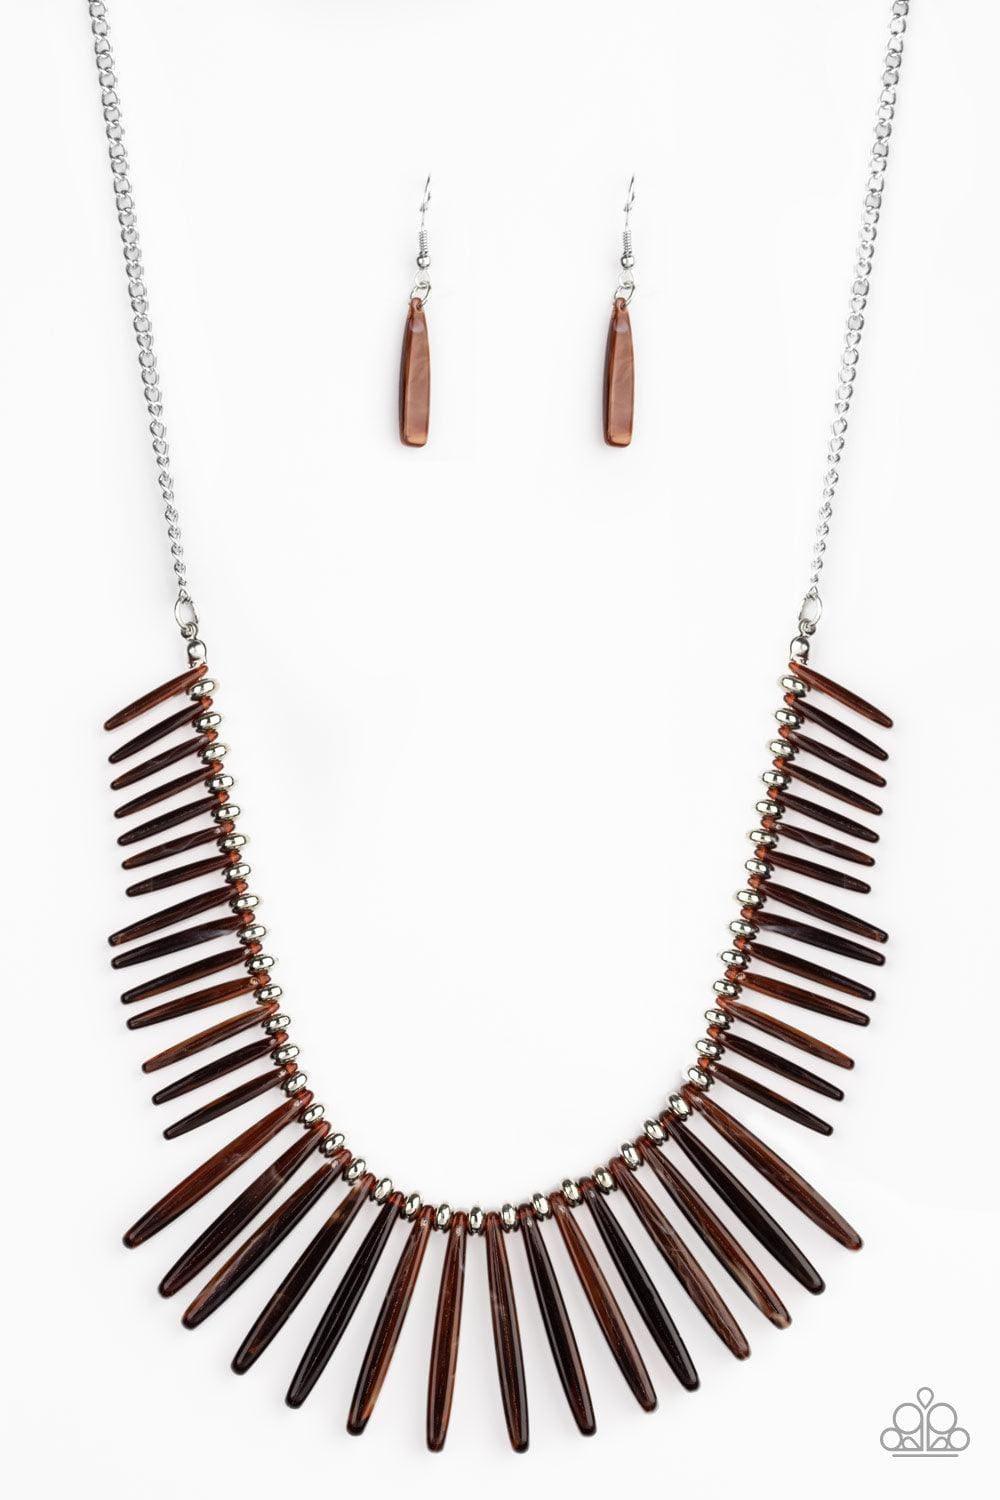 Paparazzi Accessories - Out Of My Element - Brown Necklace - Bling by JessieK